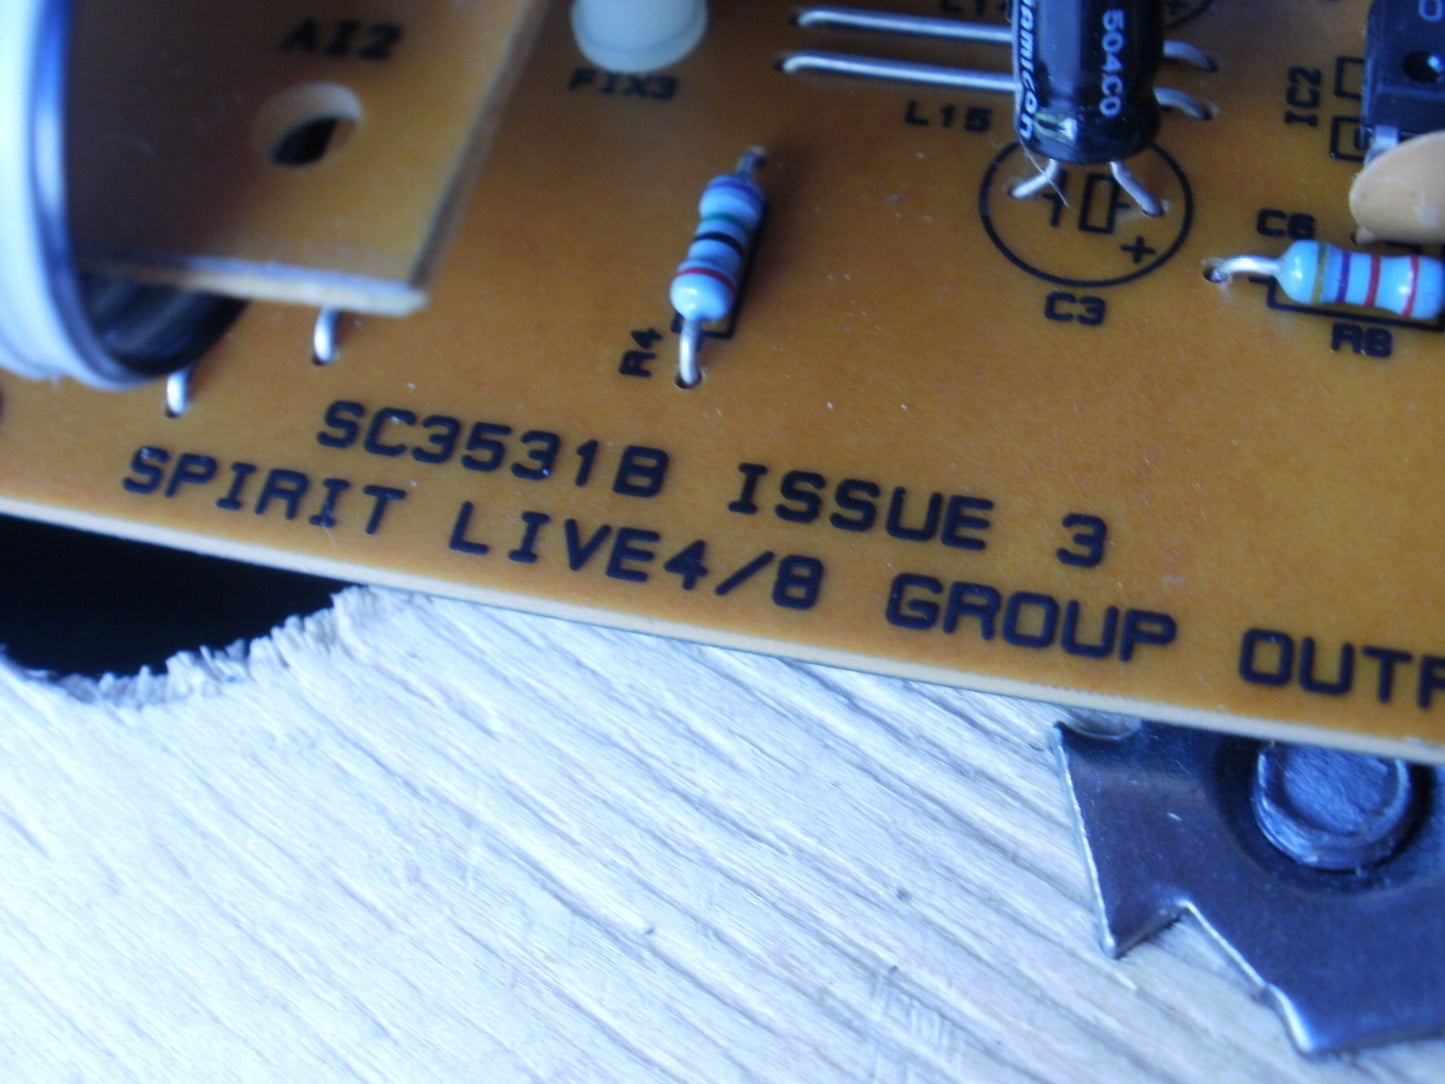 Soundcraft Spirit Live 4-8 group output board  SC3531B  And meter SC3535B various issues